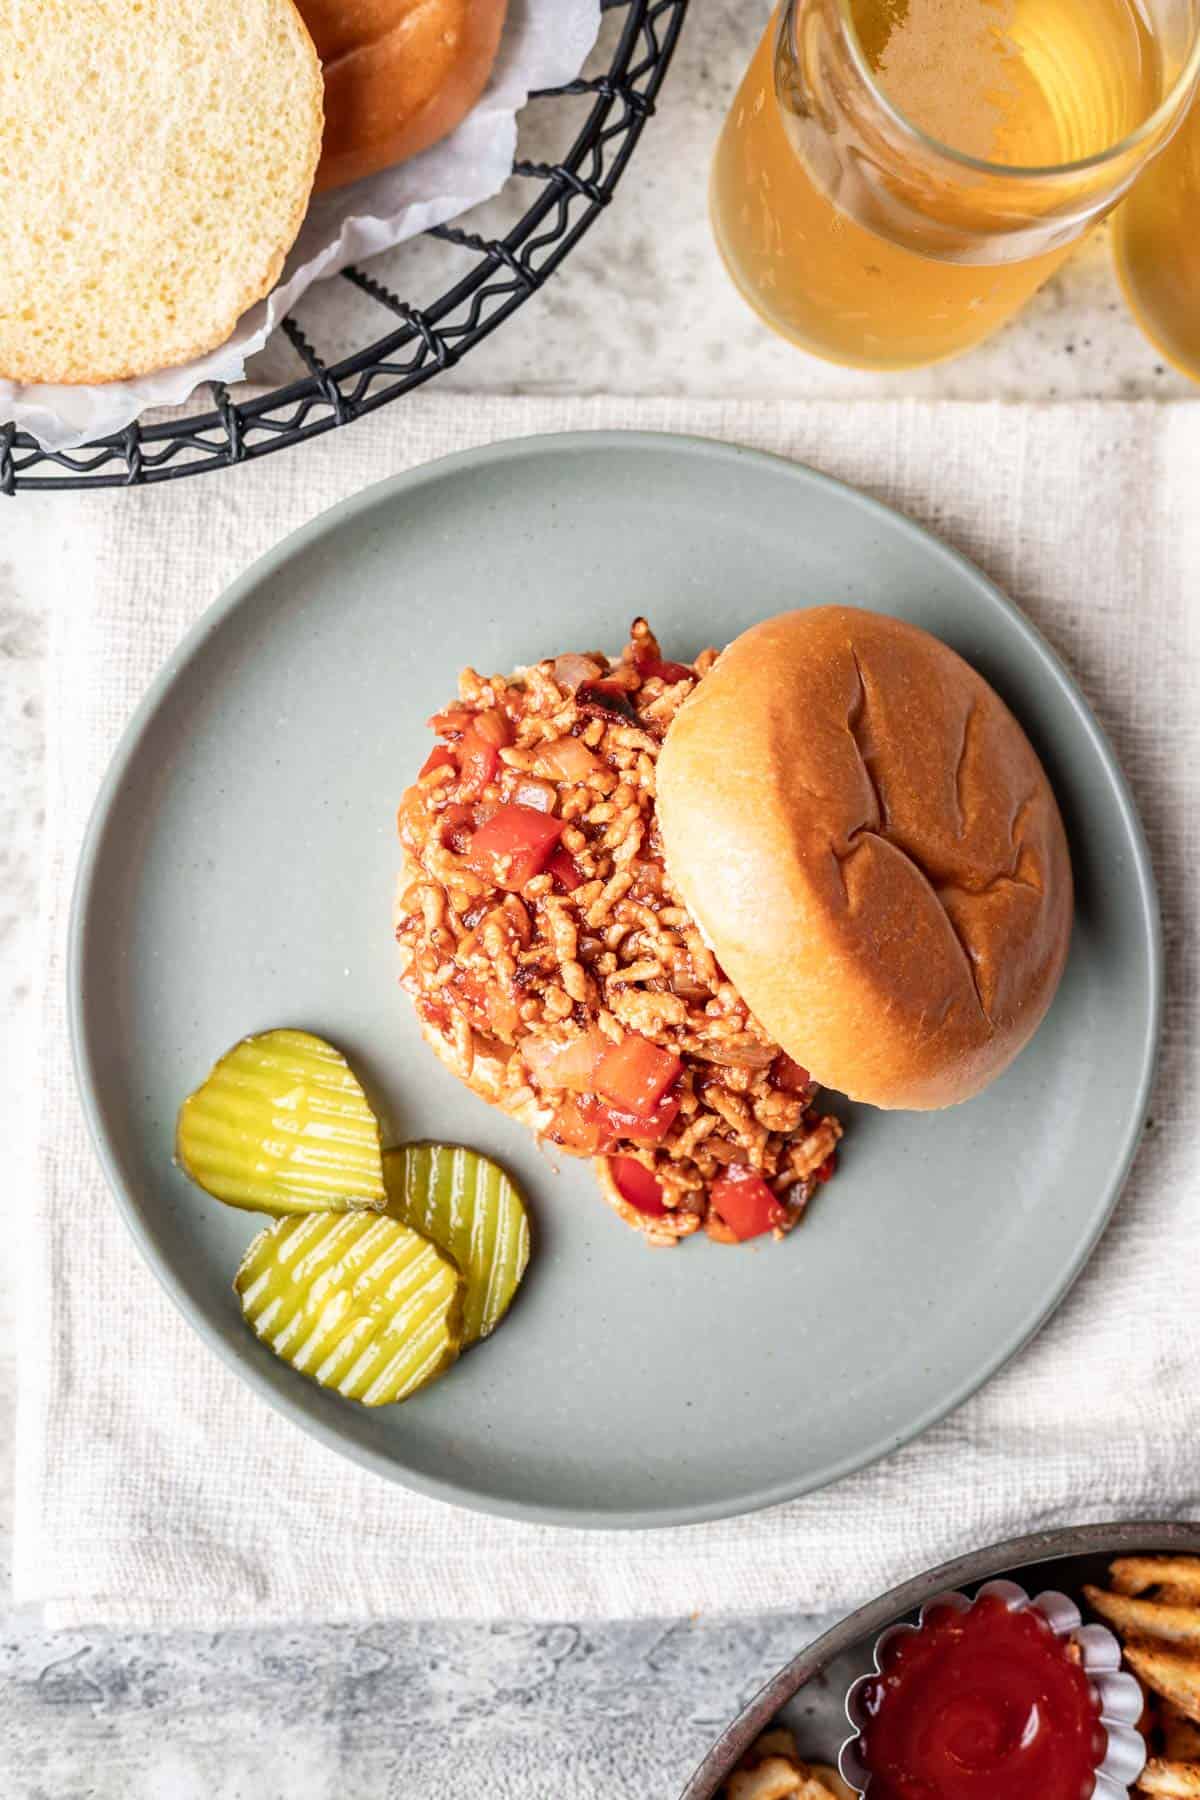 A chicken sloppy joe with on a plate with waffle fries in a dish to the side.